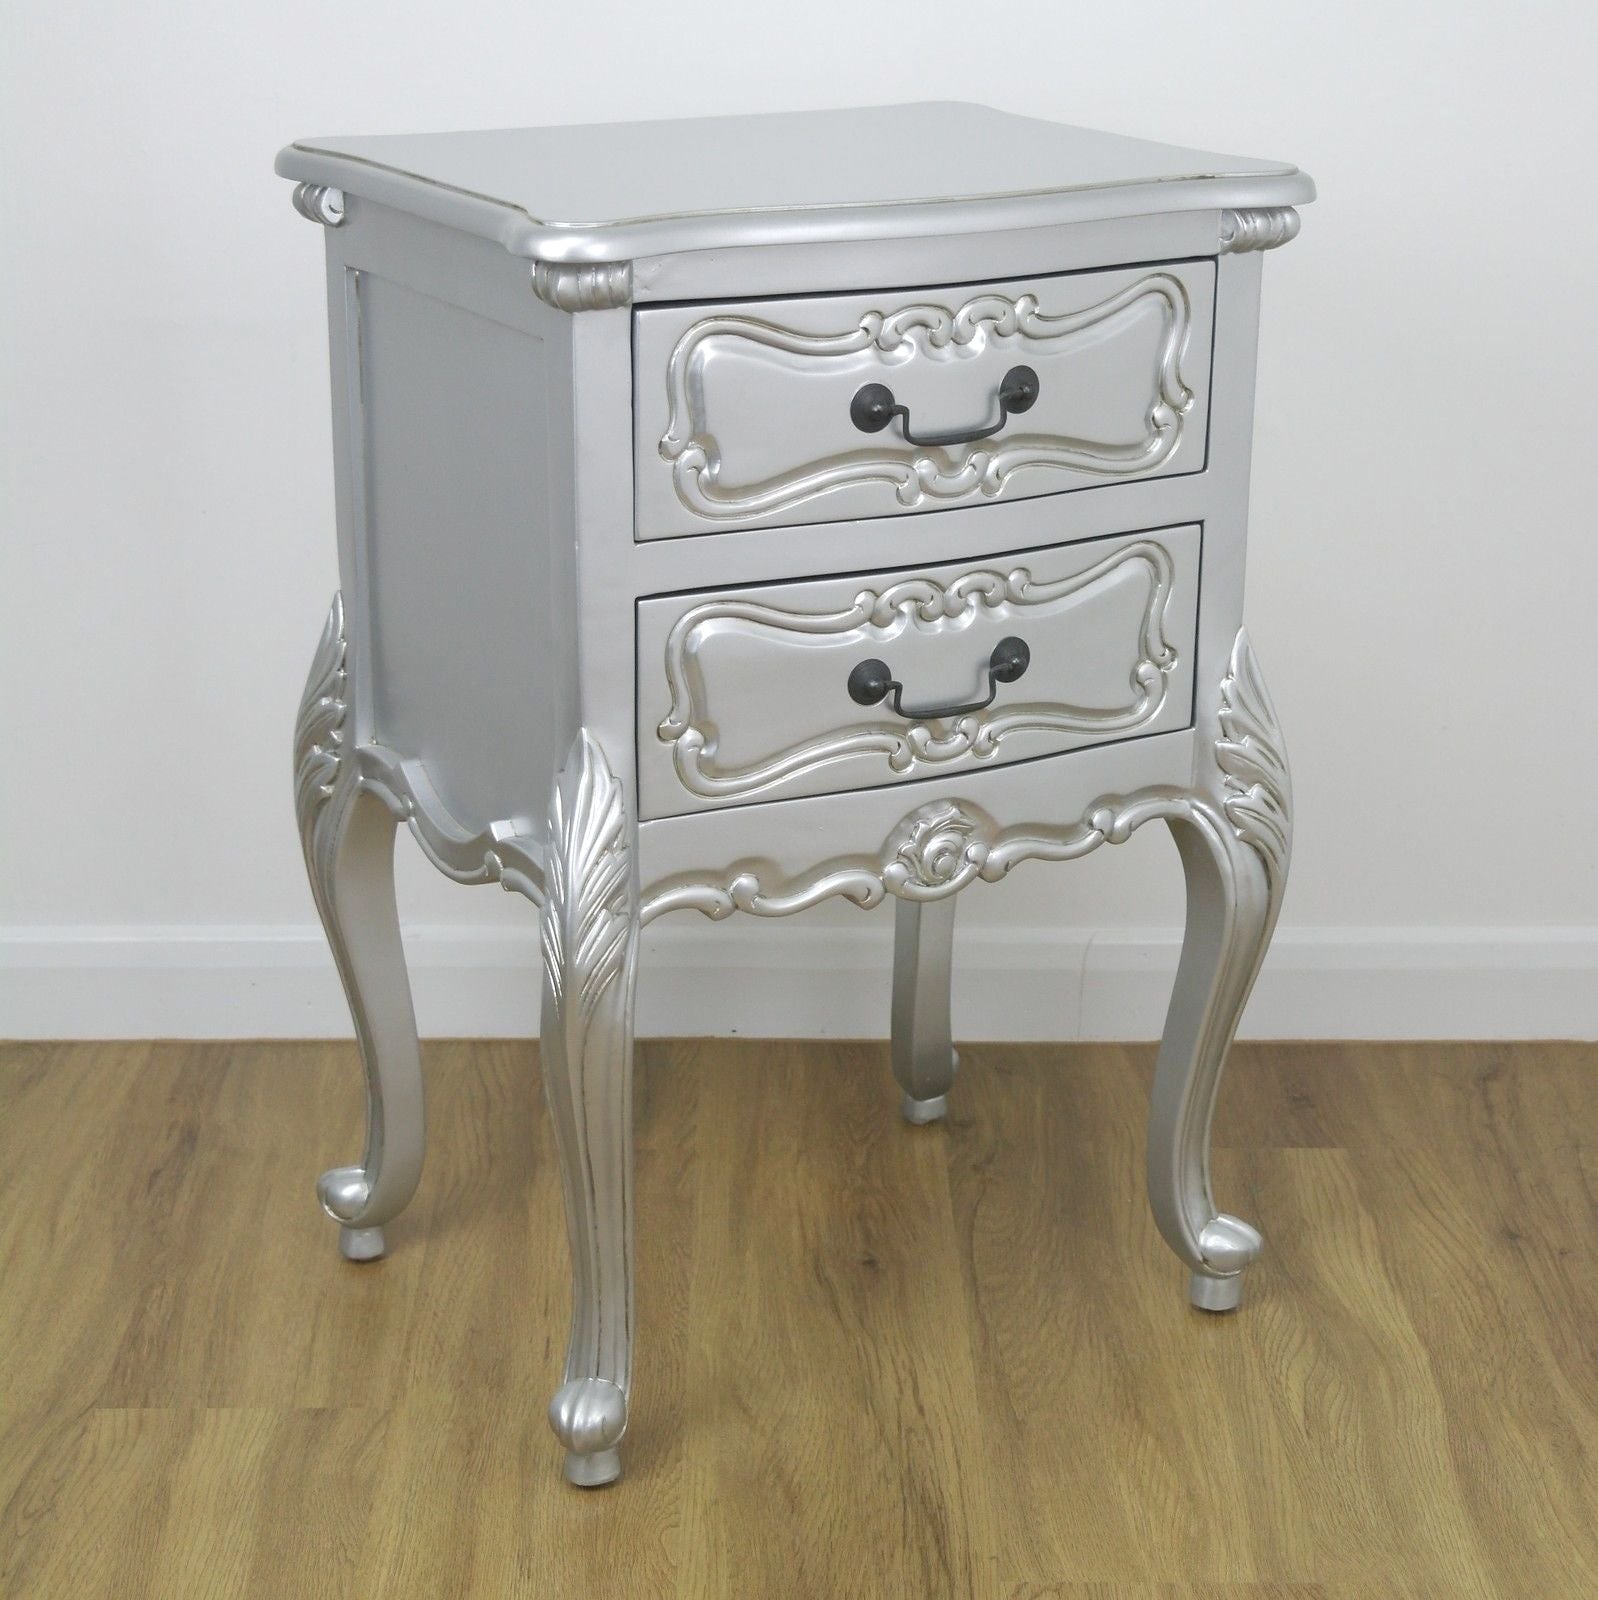 Rococo Silver Carved Bedside